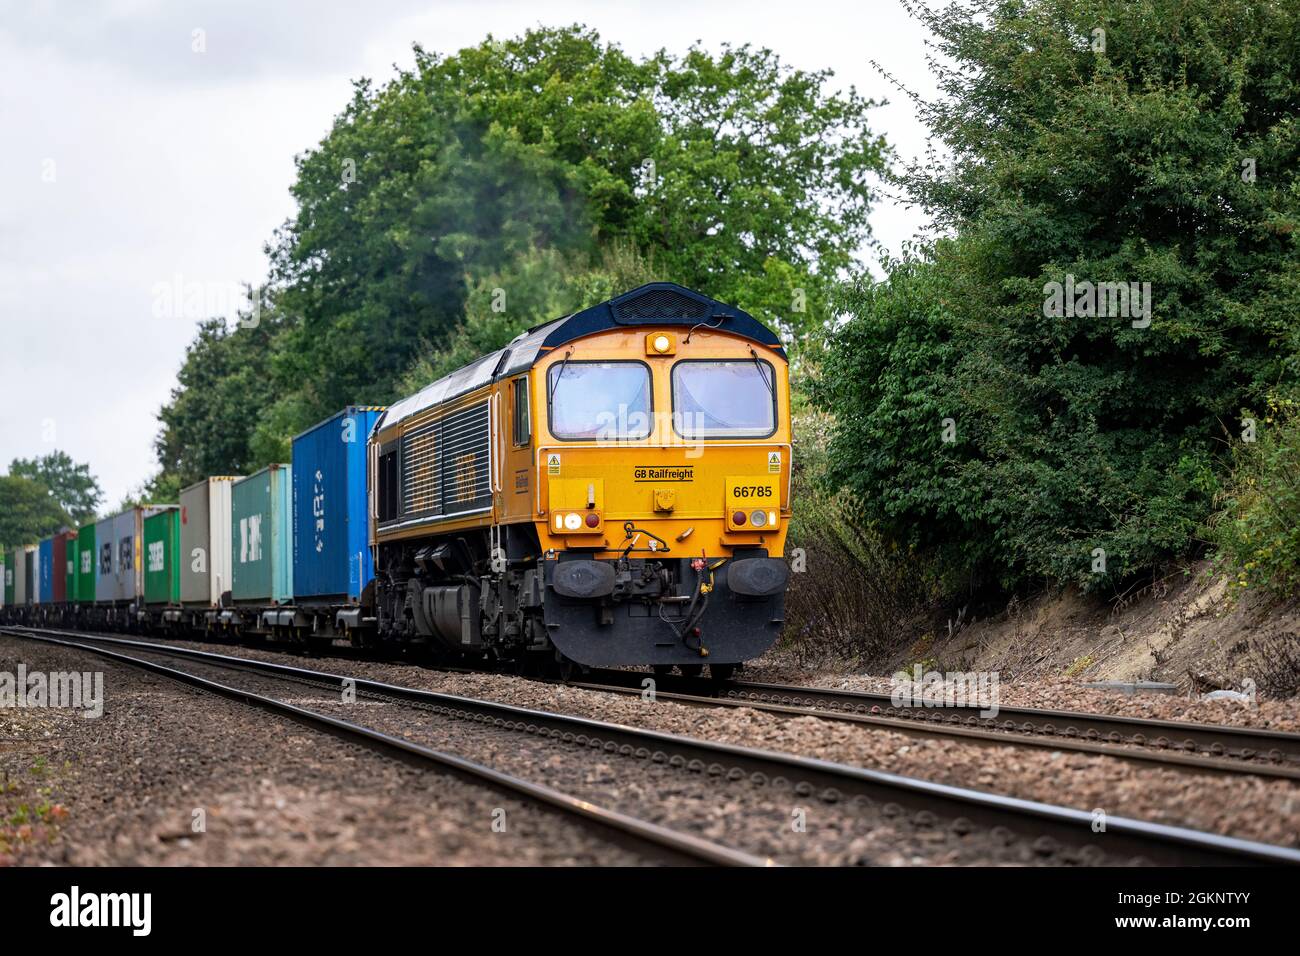 GB Railfreight train on route to the port of Felixstowe, Westerfield, Suffolk. Stock Photo